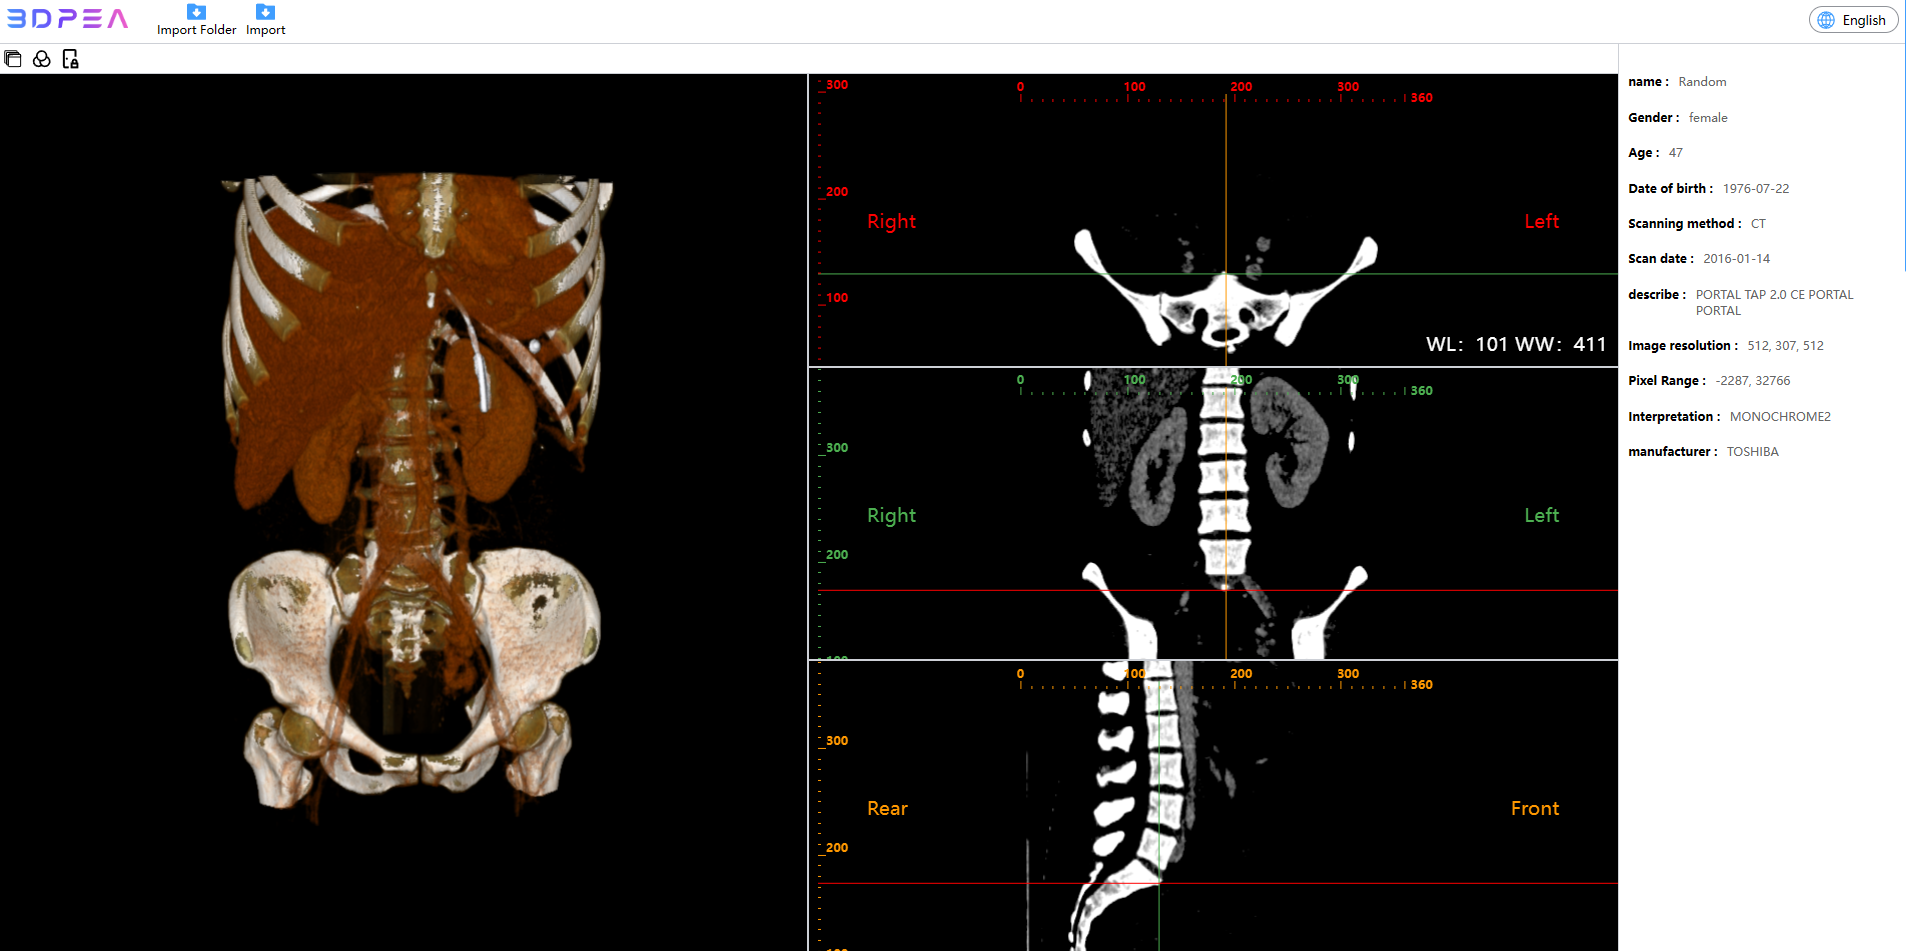 With its intuitive design, 3DPEA DICOM Viewer is easy to navigate, even for those with limited tech skills.